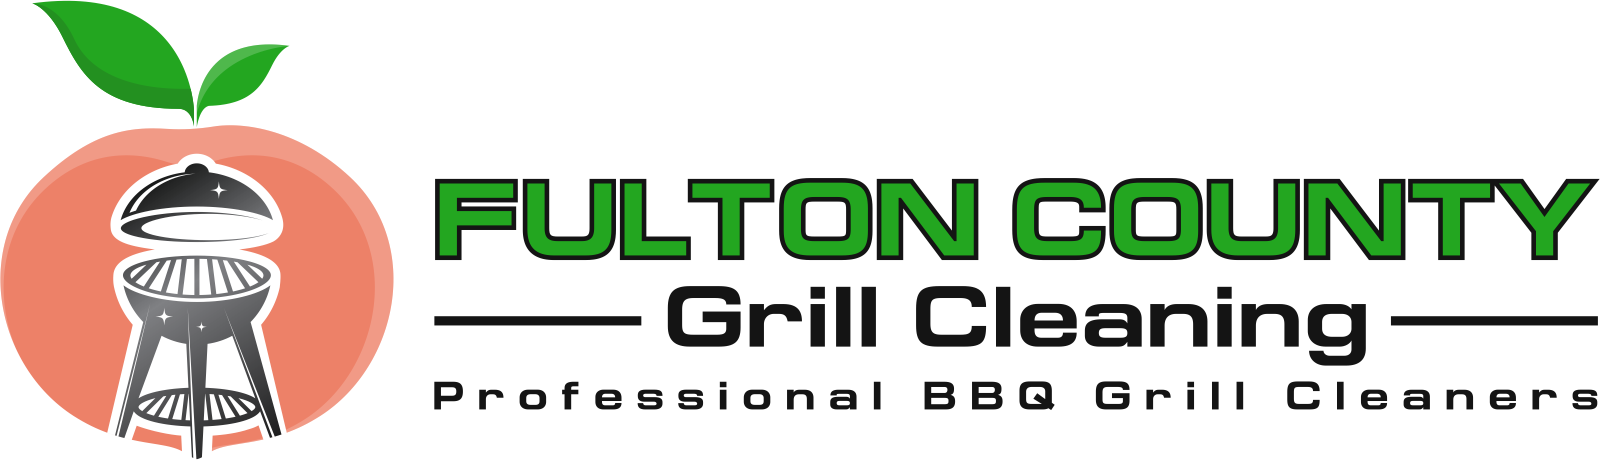 Fulton County  BBQ Grill Cleaning Service | Professional Outdoor BBQ Grill Cleaning